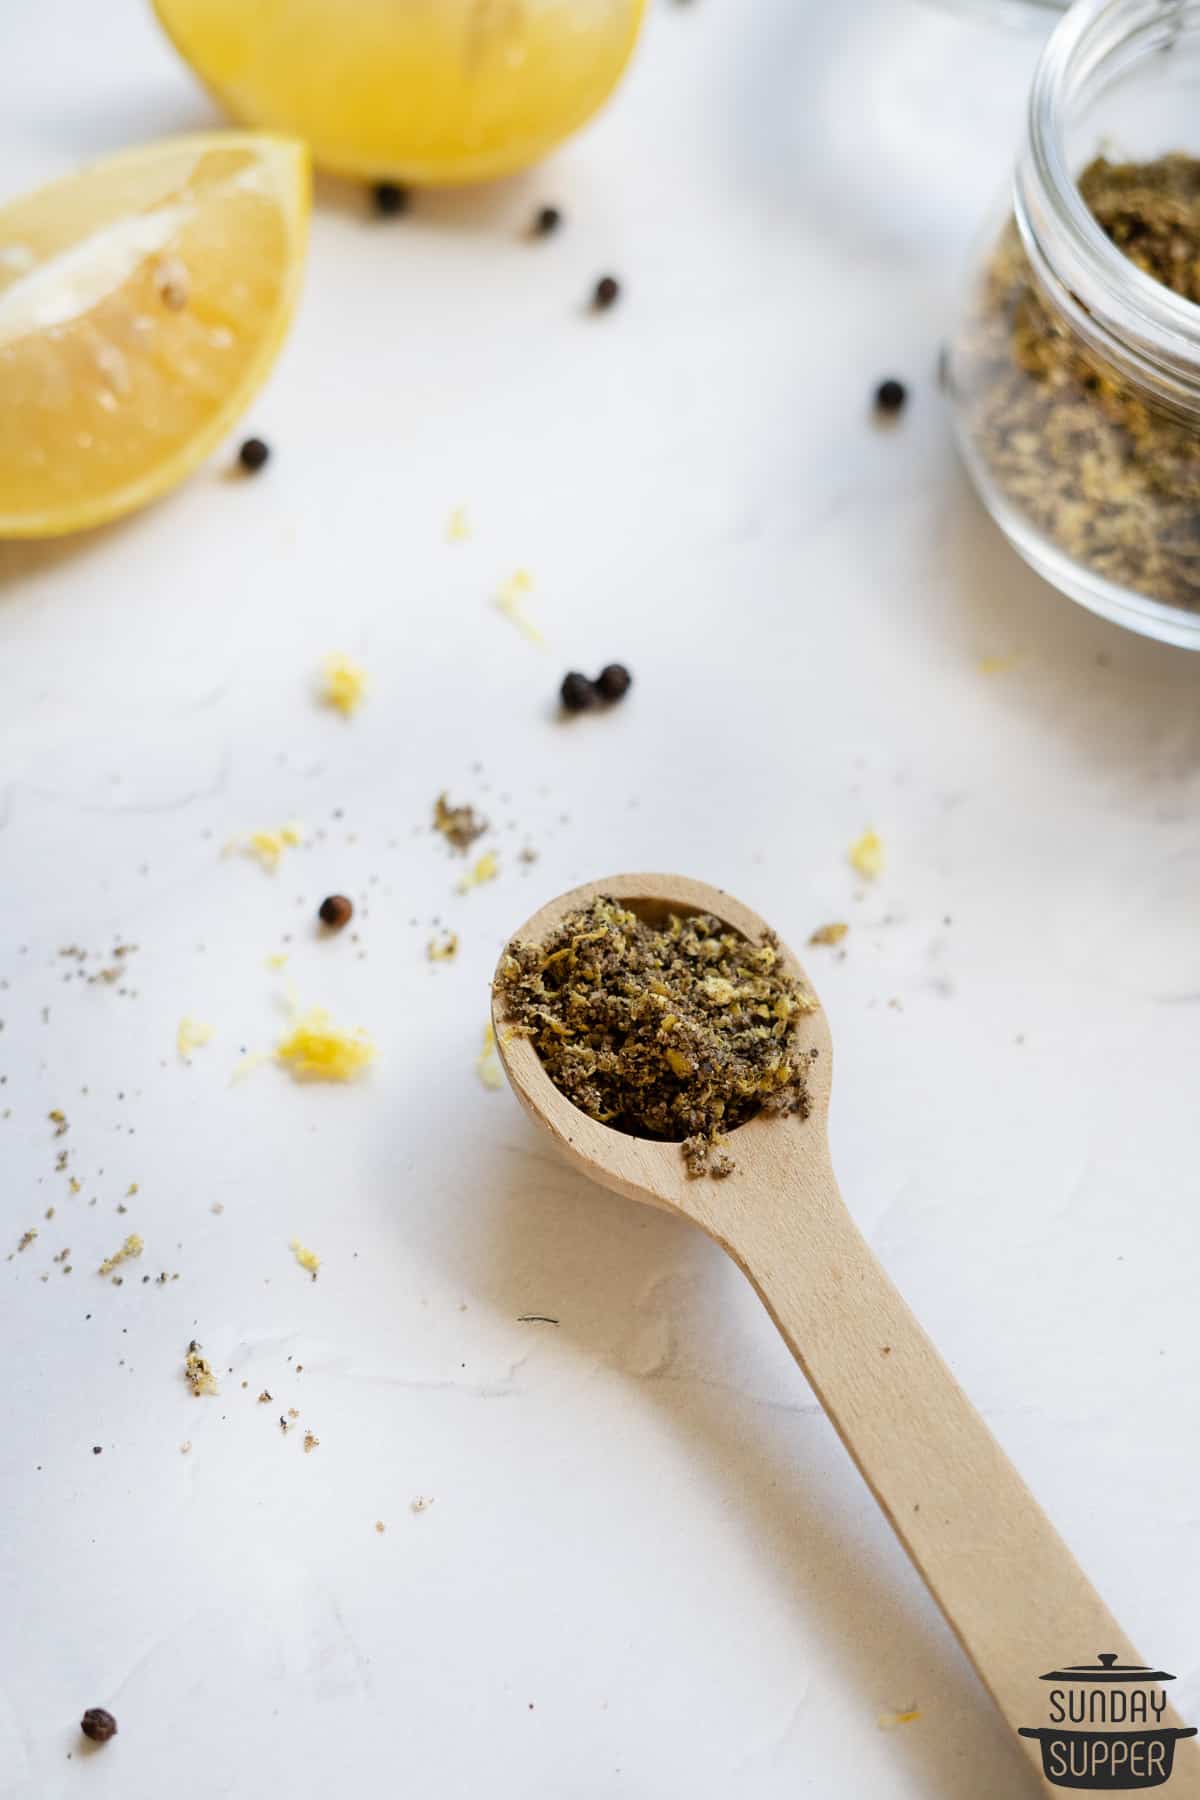 a serving spoon filled with lemon pepper seasoning